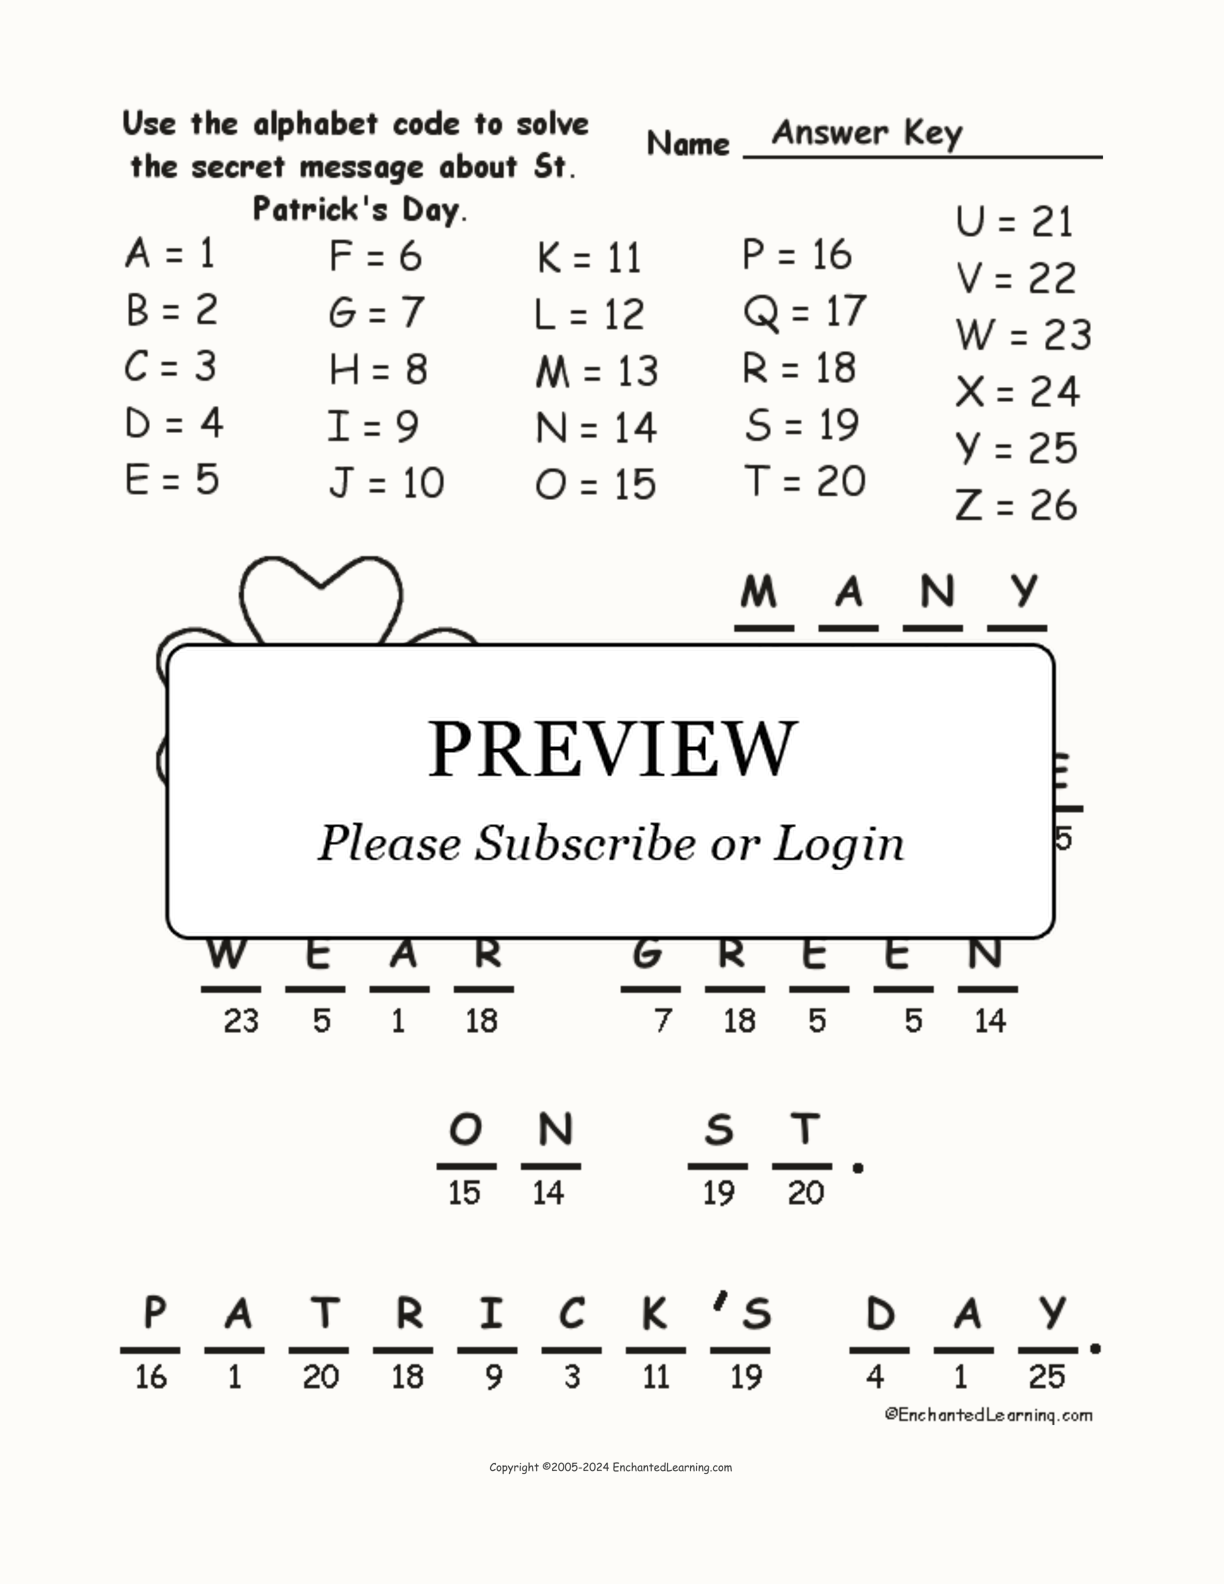 St. Patrick's Day Alphabet Code interactive worksheet page 2